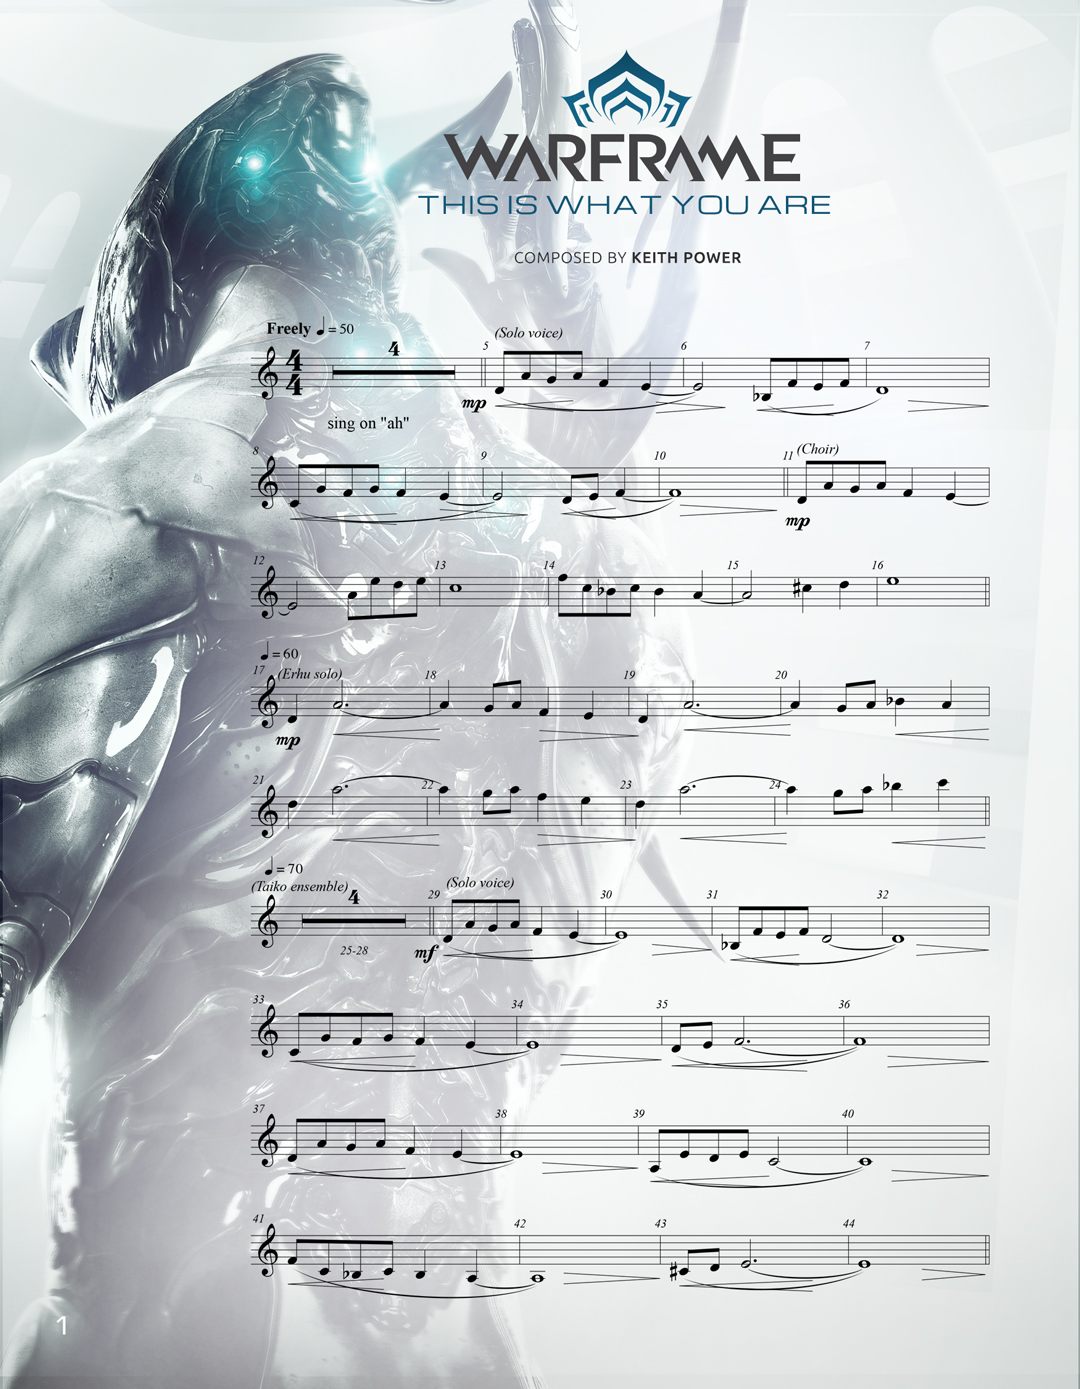 This is What You Are（warframe第二场梦BGM）吉他谱(图片谱,solo)_warframe_imageproxy.jpg